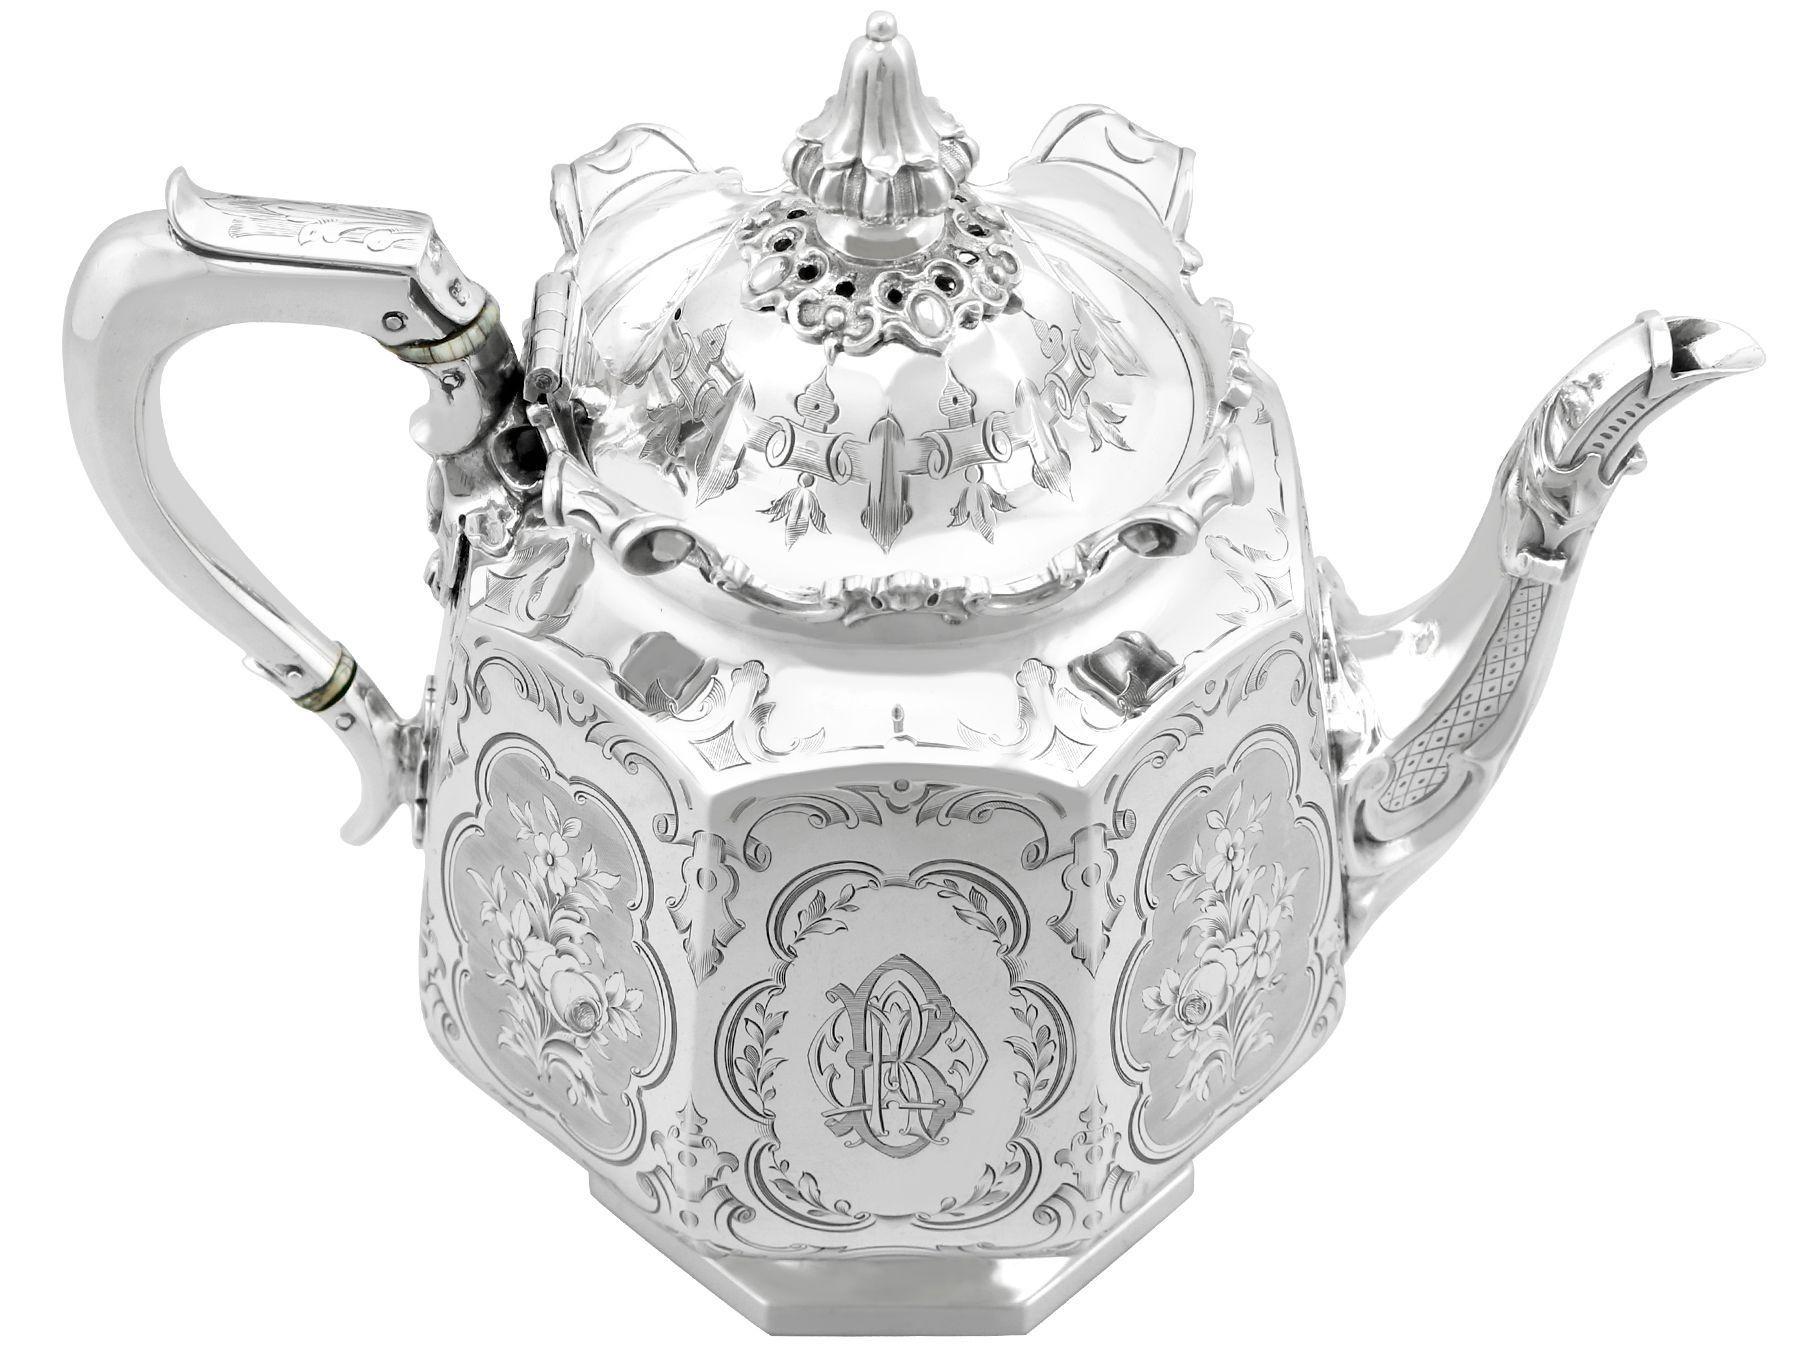 English Antique Victorian Sterling Silver Teapot For Sale